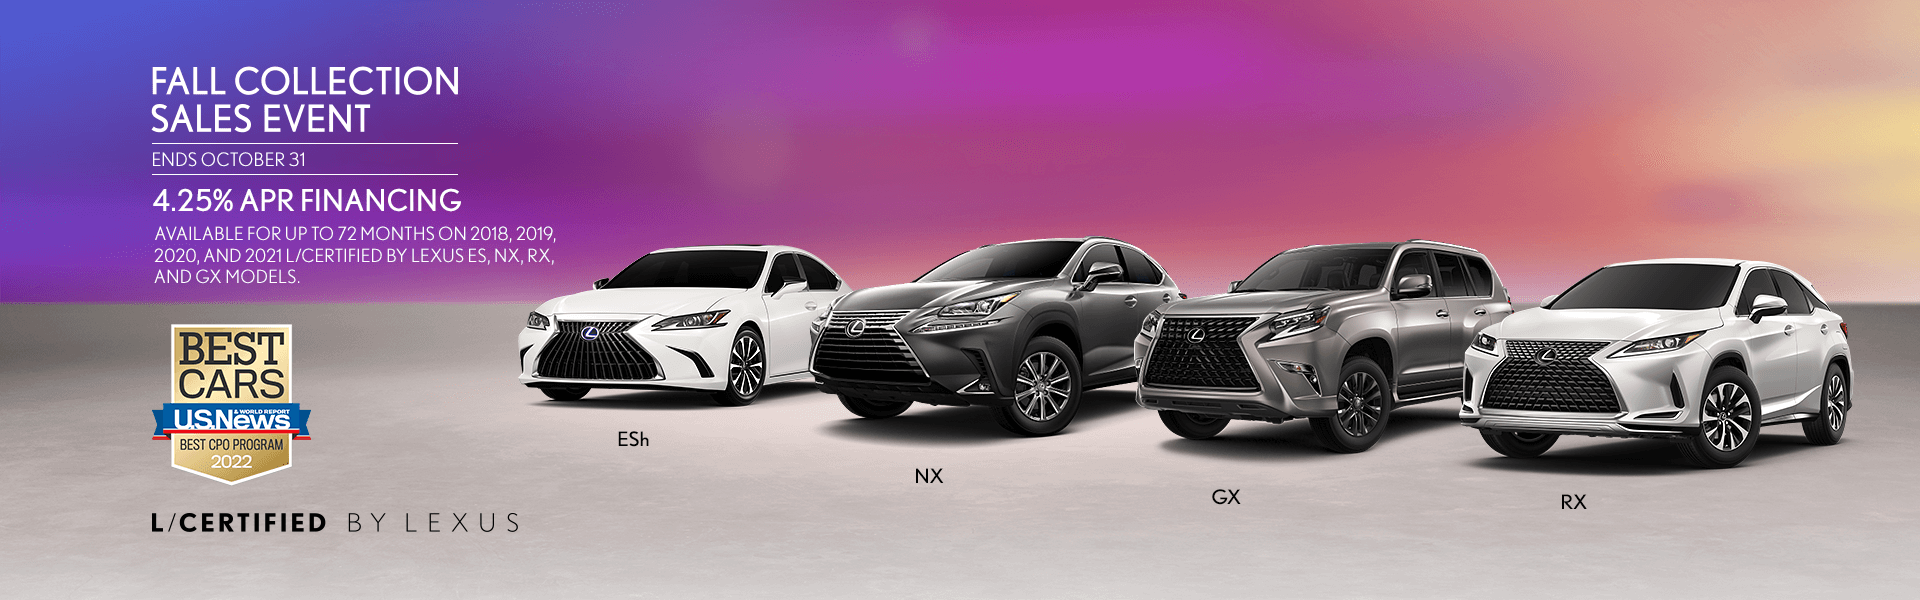 Lexus L|Certified Fall Sales event featuring the ESh and RX in Eminent White Pearl